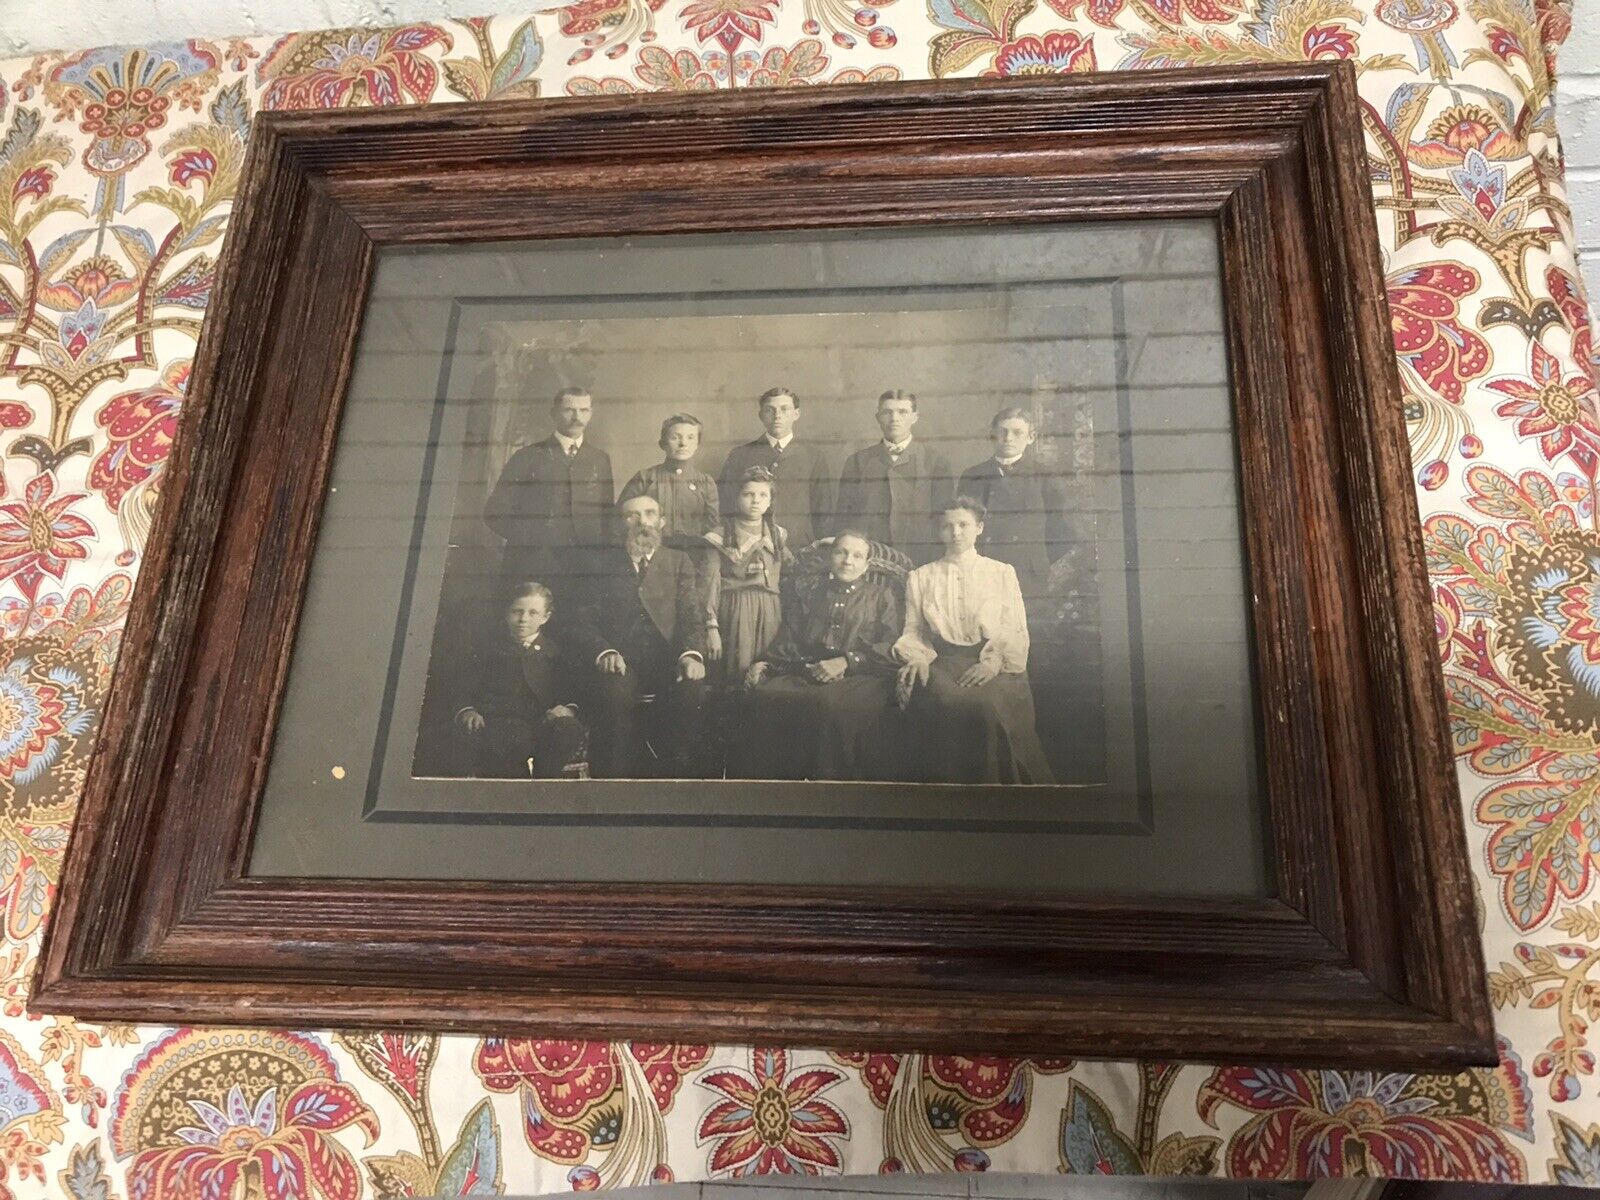 ANTIQUE VTG BEAUTIFULLY FRAMED FAMILY GROUP PHOTOGRAPH PICTURE WRITING ON BACK